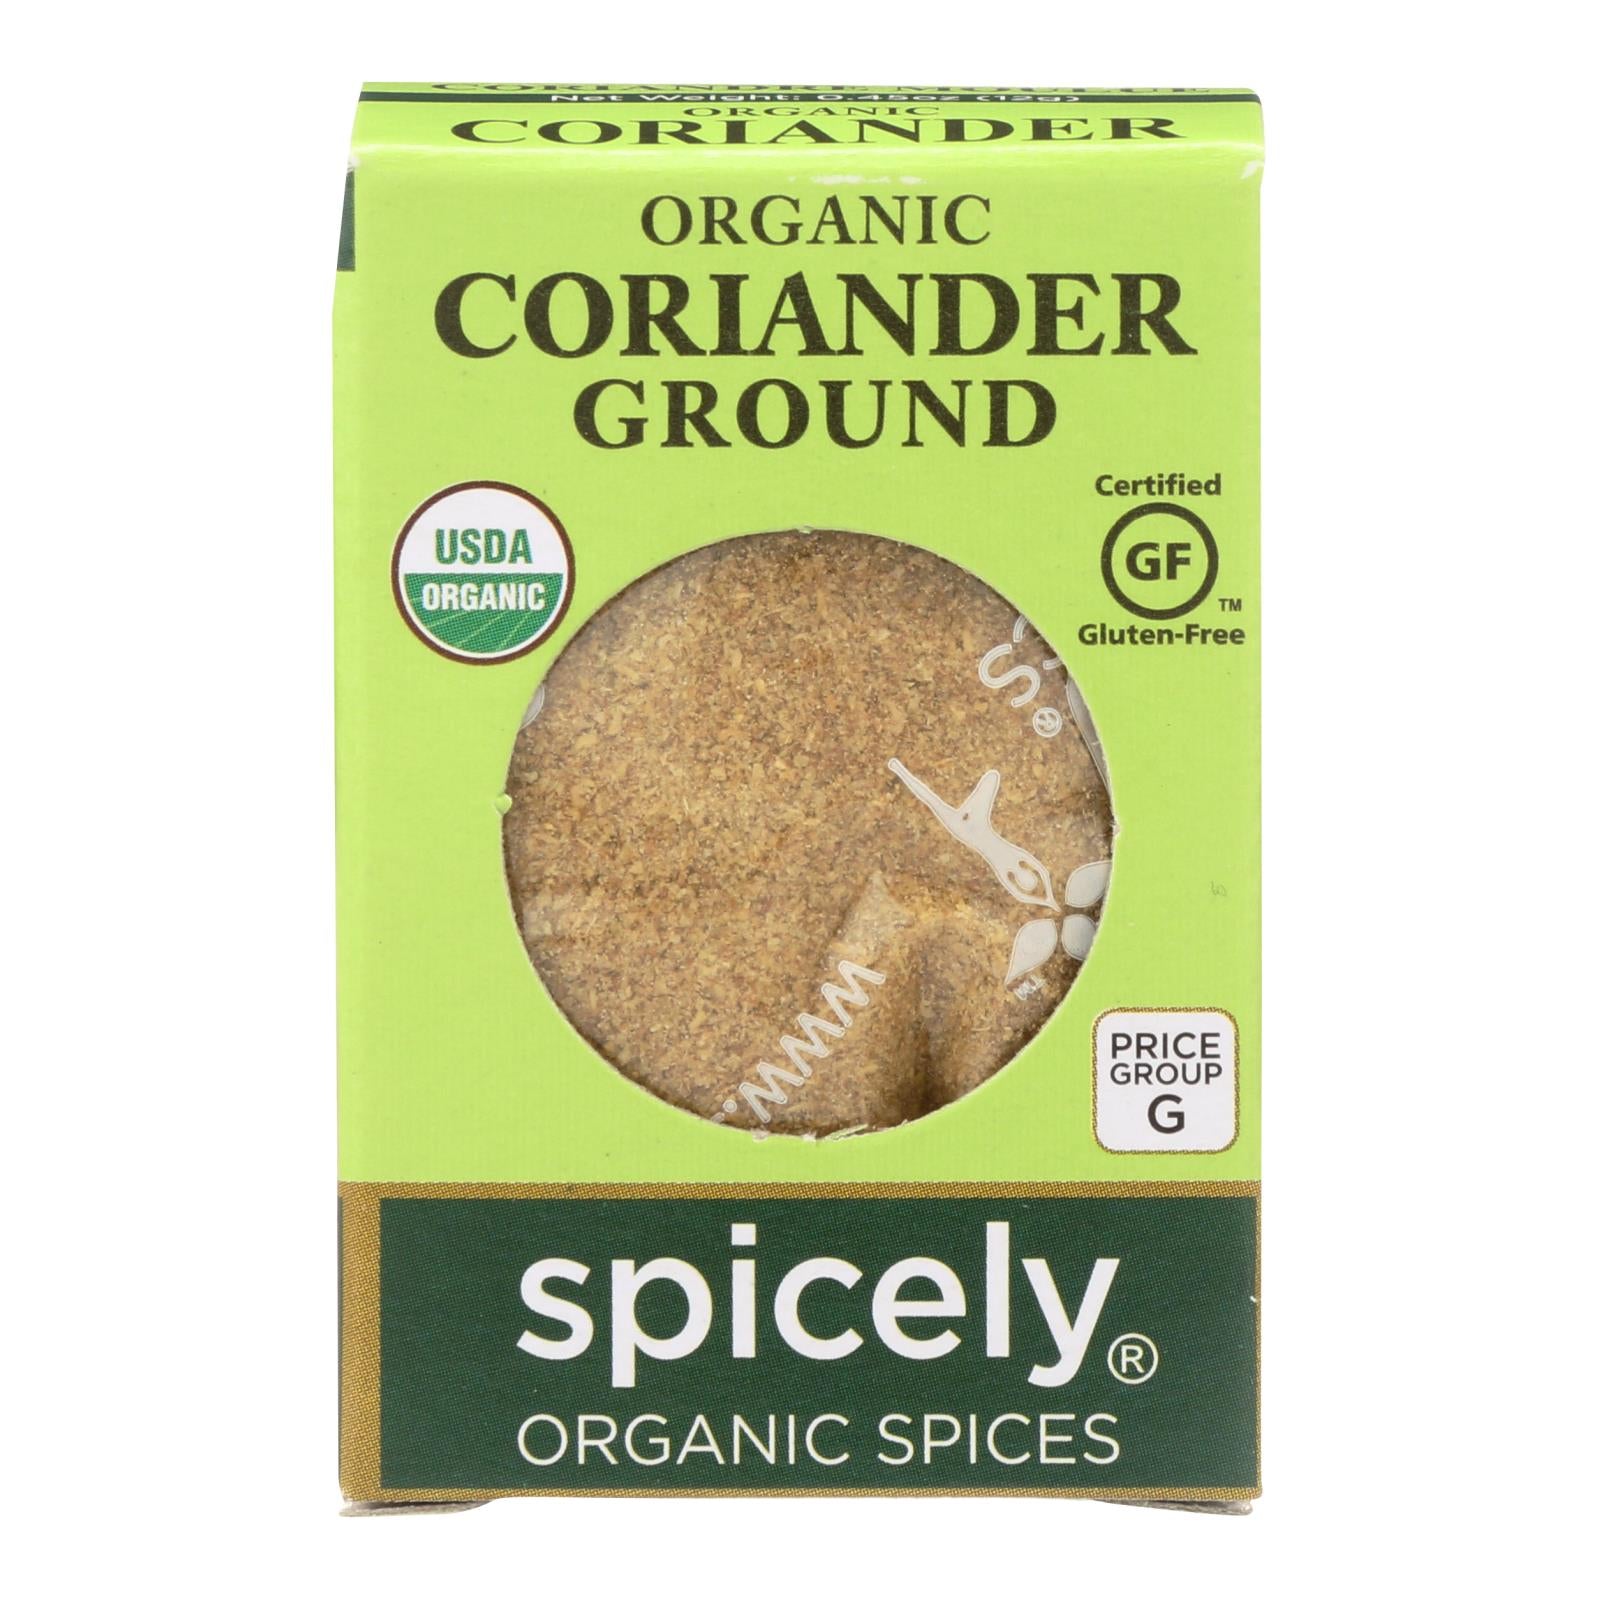 Spicely Organics - Organic Coriander - Ground - Case Of 6 - 0.45 Oz. - Whole Green Foods